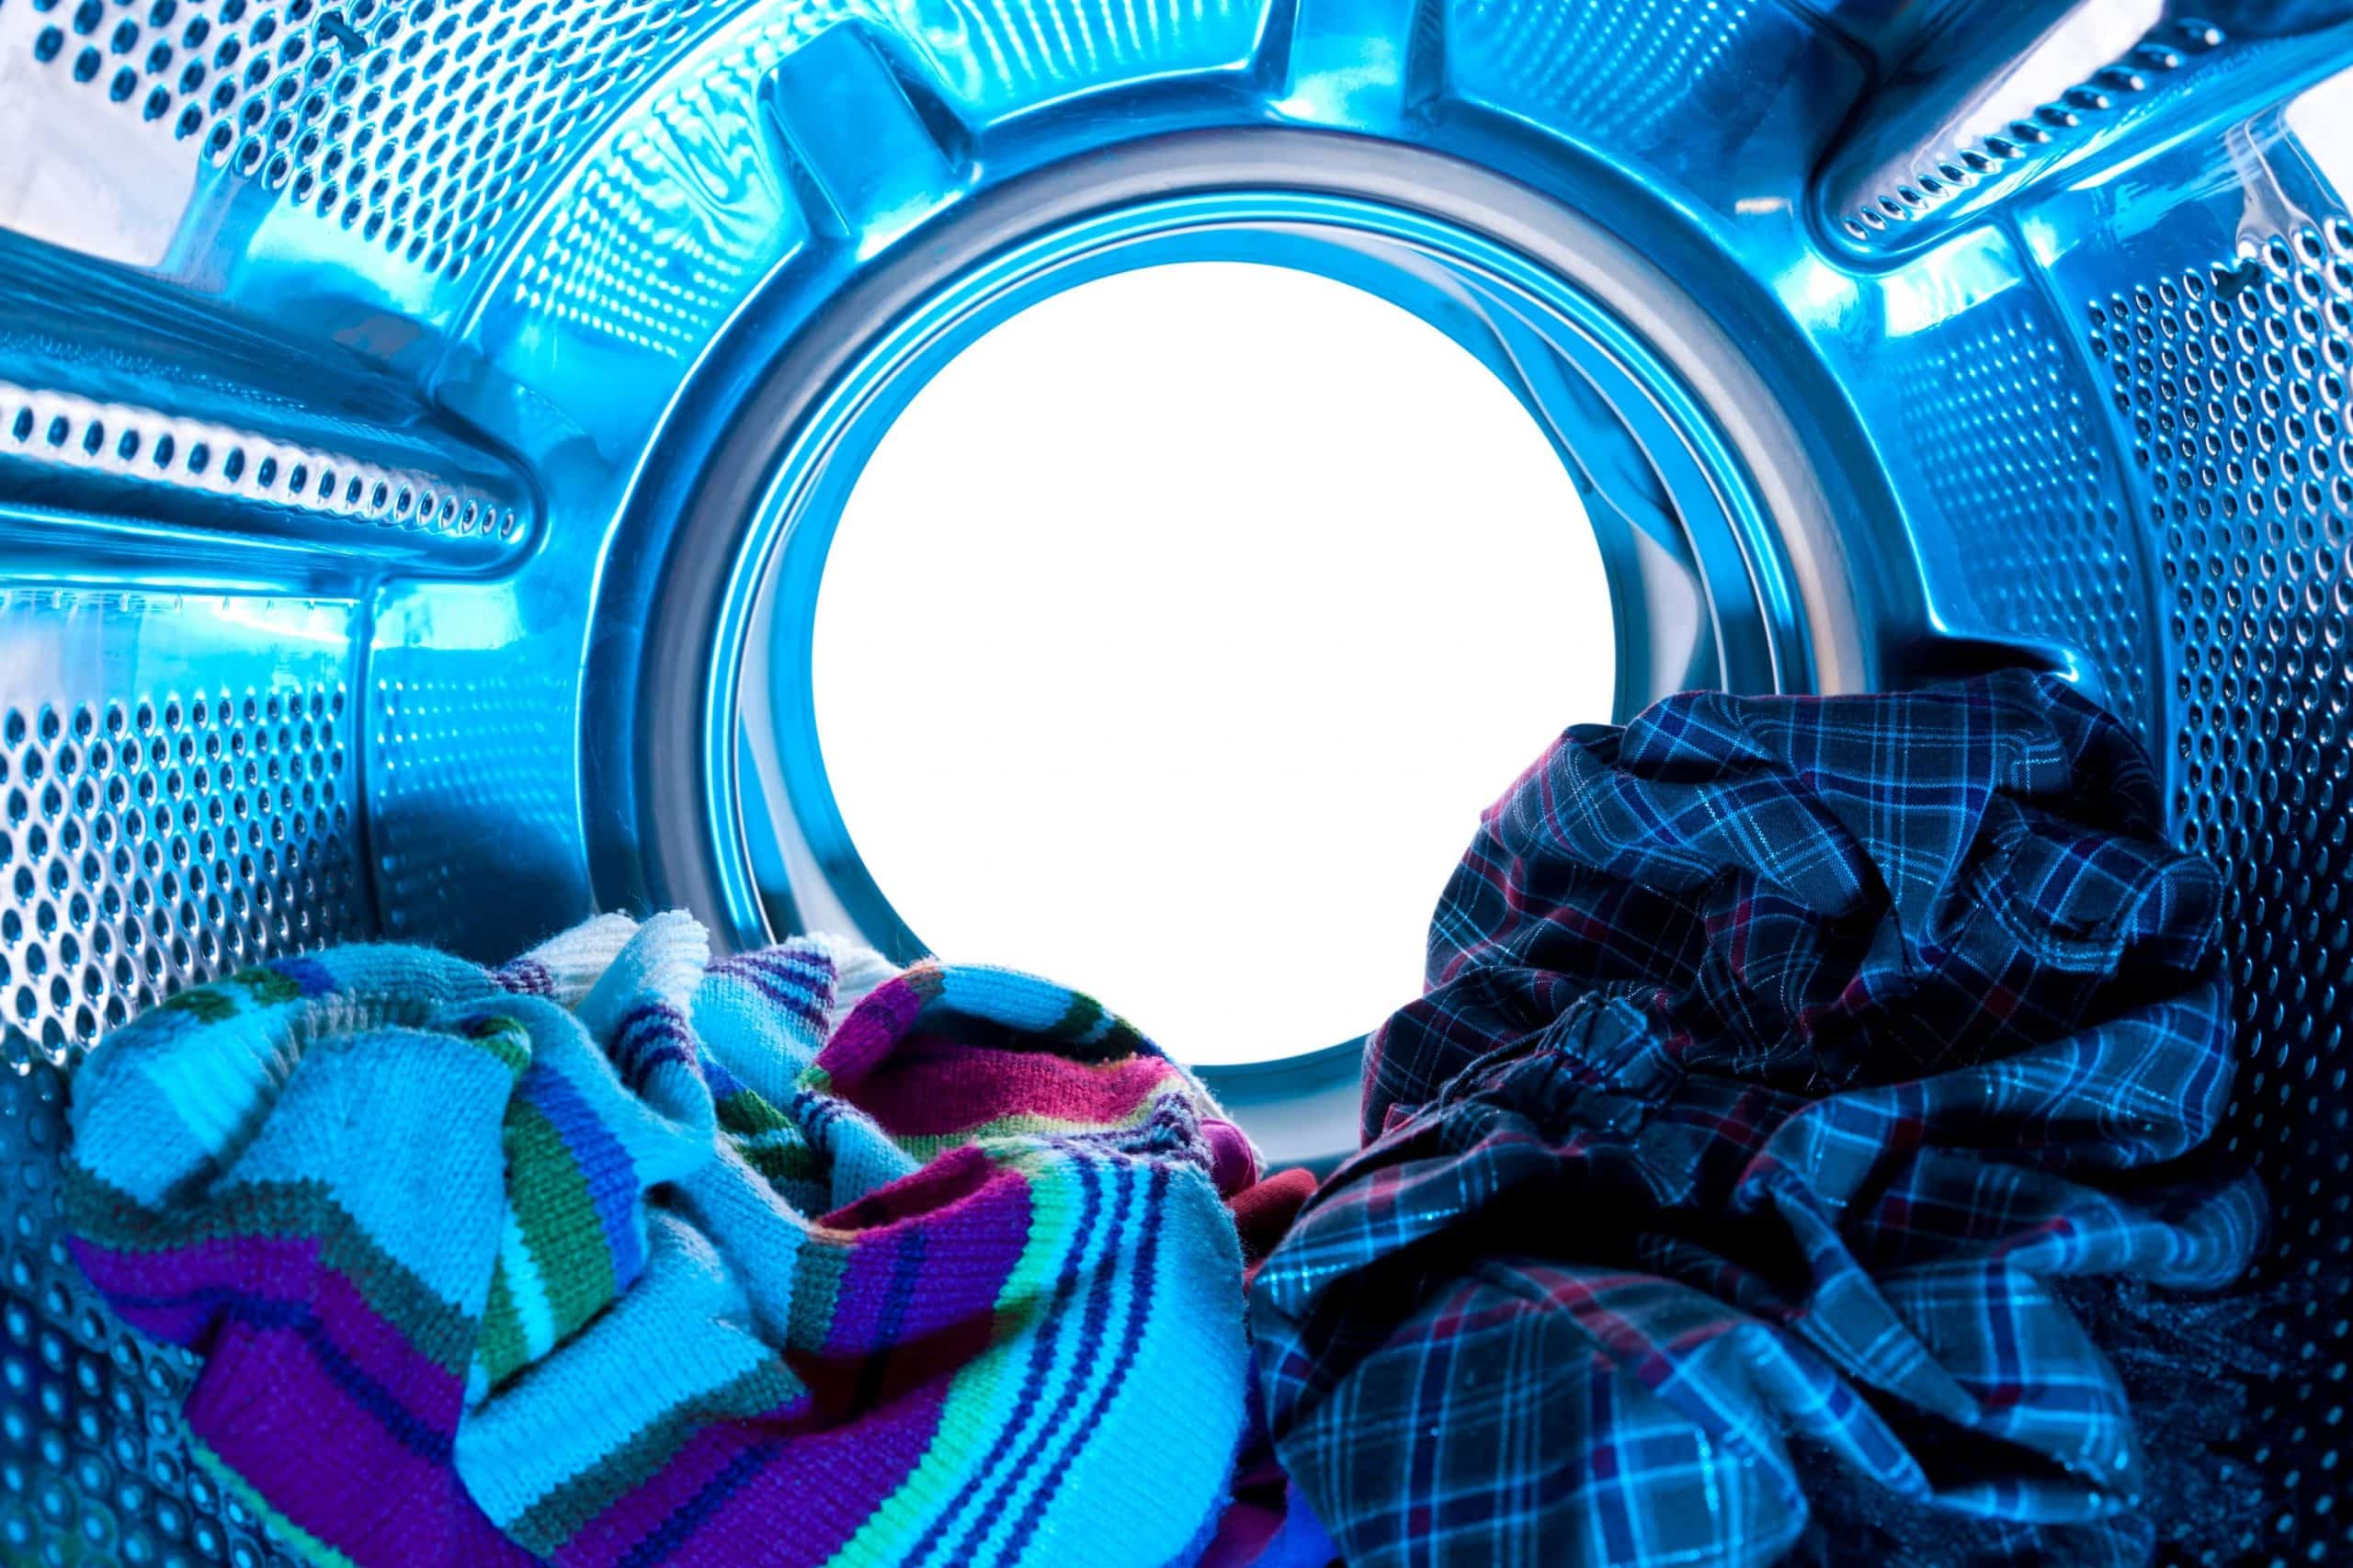 Featured image for “Reasons Your Dryer Isn’t Spinning”